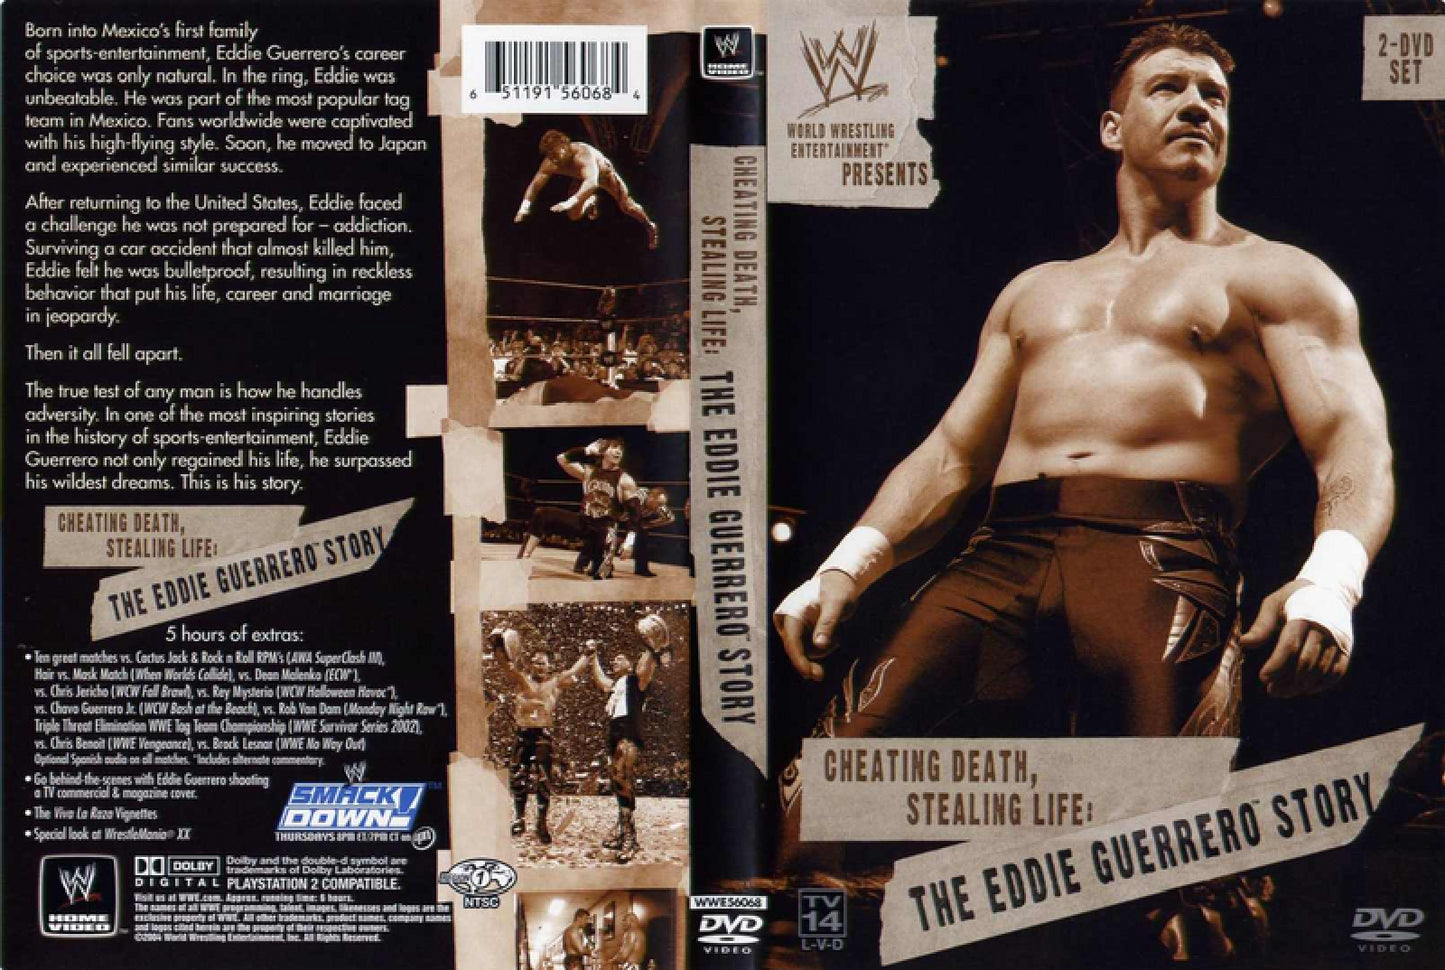 cheating death stealing life the eddie guerrero story